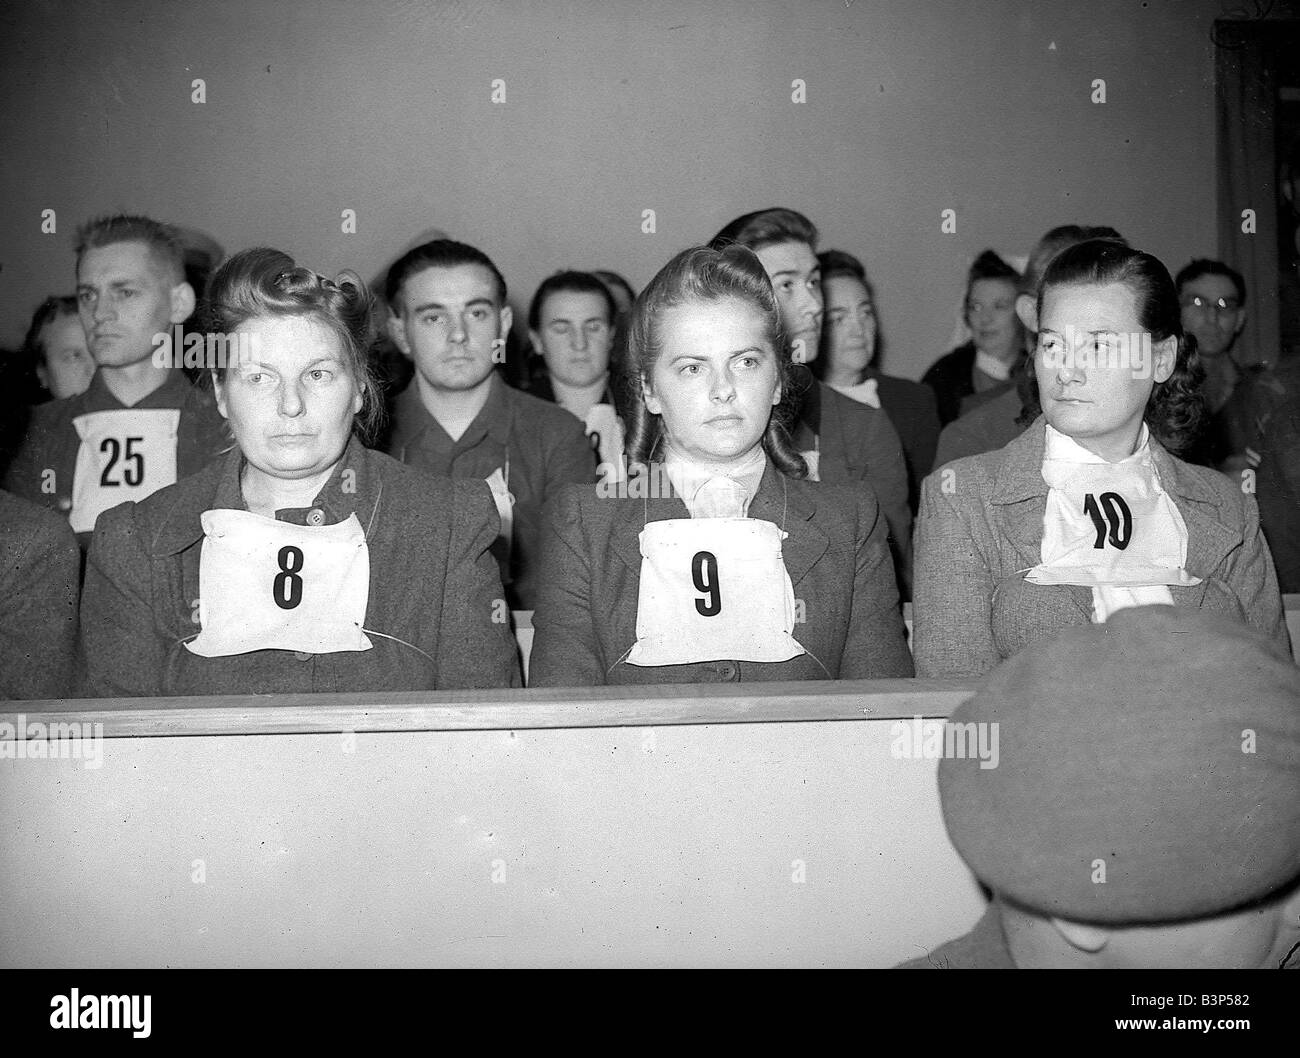 Irma Grese in court with others accused during Belsen trial Sept 1945 The camp Kommandant Josef Kramer and members of the SS stationed at Belsen were put on trial by the allies for two charges of war crimes details of which can be found in the paper file Irma Grese was an SS officer in the camp and she was placed on trial separately because she was alleged to have been particularly brutal towards the prisoners She always carried a pistol and a whip with her and one inmate told how two girls who had just been selected to be gassed tried to get away Grese caught them and then shot them in cold Stock Photo